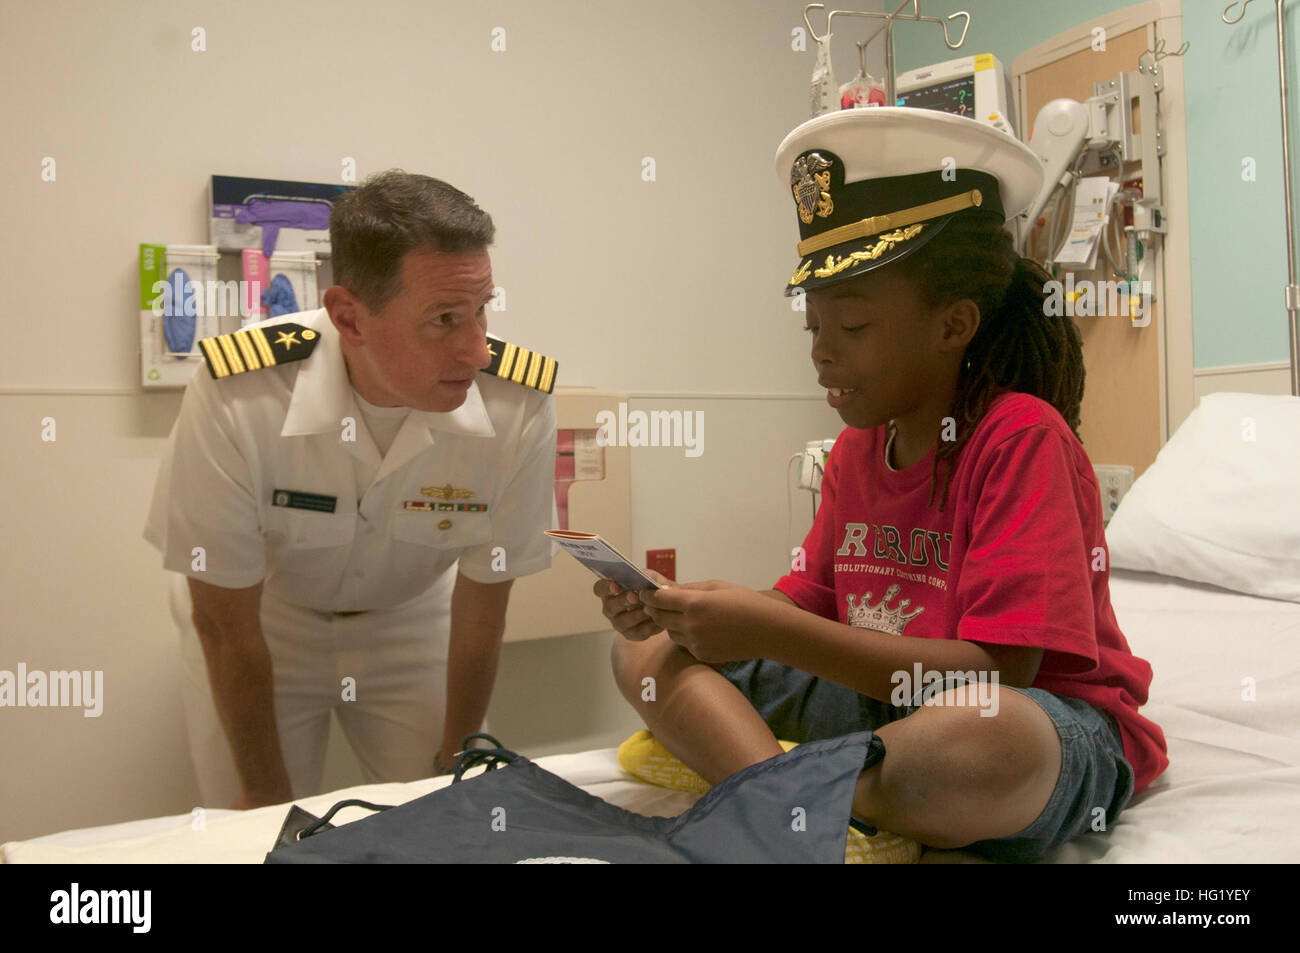 140430-N-GC472-398 FT. LAUDERDALE, Fla. (April 30, 2014) Capt. Kenneth Coleman, executive officer of the amphibious transport dock ship USS New York (LPD 21), visits children at the Joe DiMaggio Children's Hospital during Fleet Week Port Everglades. This is the 24th annual Fleet Week in Port Everglades, South Florida's annual celebration of the maritime services. (U.S. Navy photo by Mass Communication Specialist 3rd Class Angus Beckles/Released) USS New York operations 140430-N-GC472-398 Stock Photo